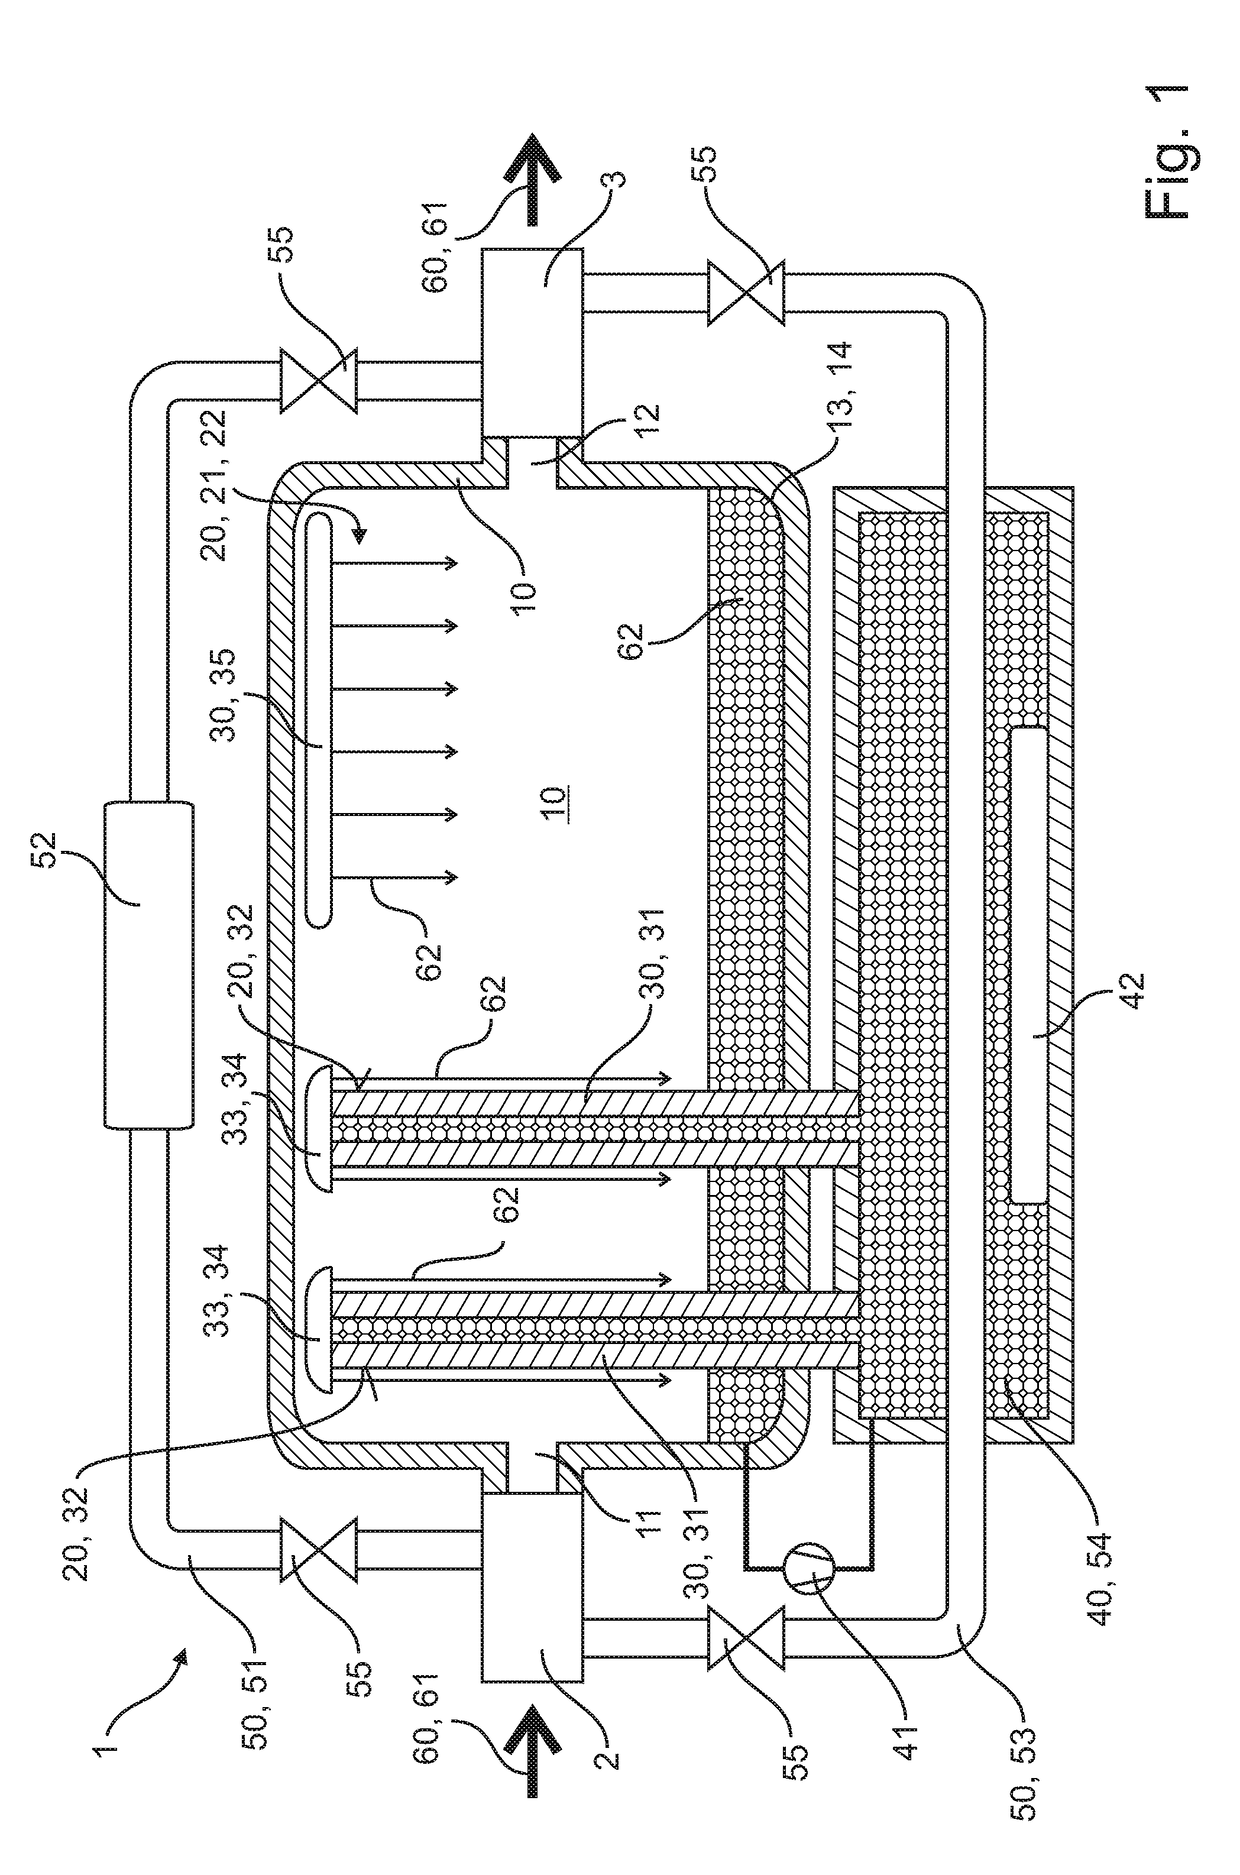 Conditioning module for regulating the temperature of and humidifying a flowing gas